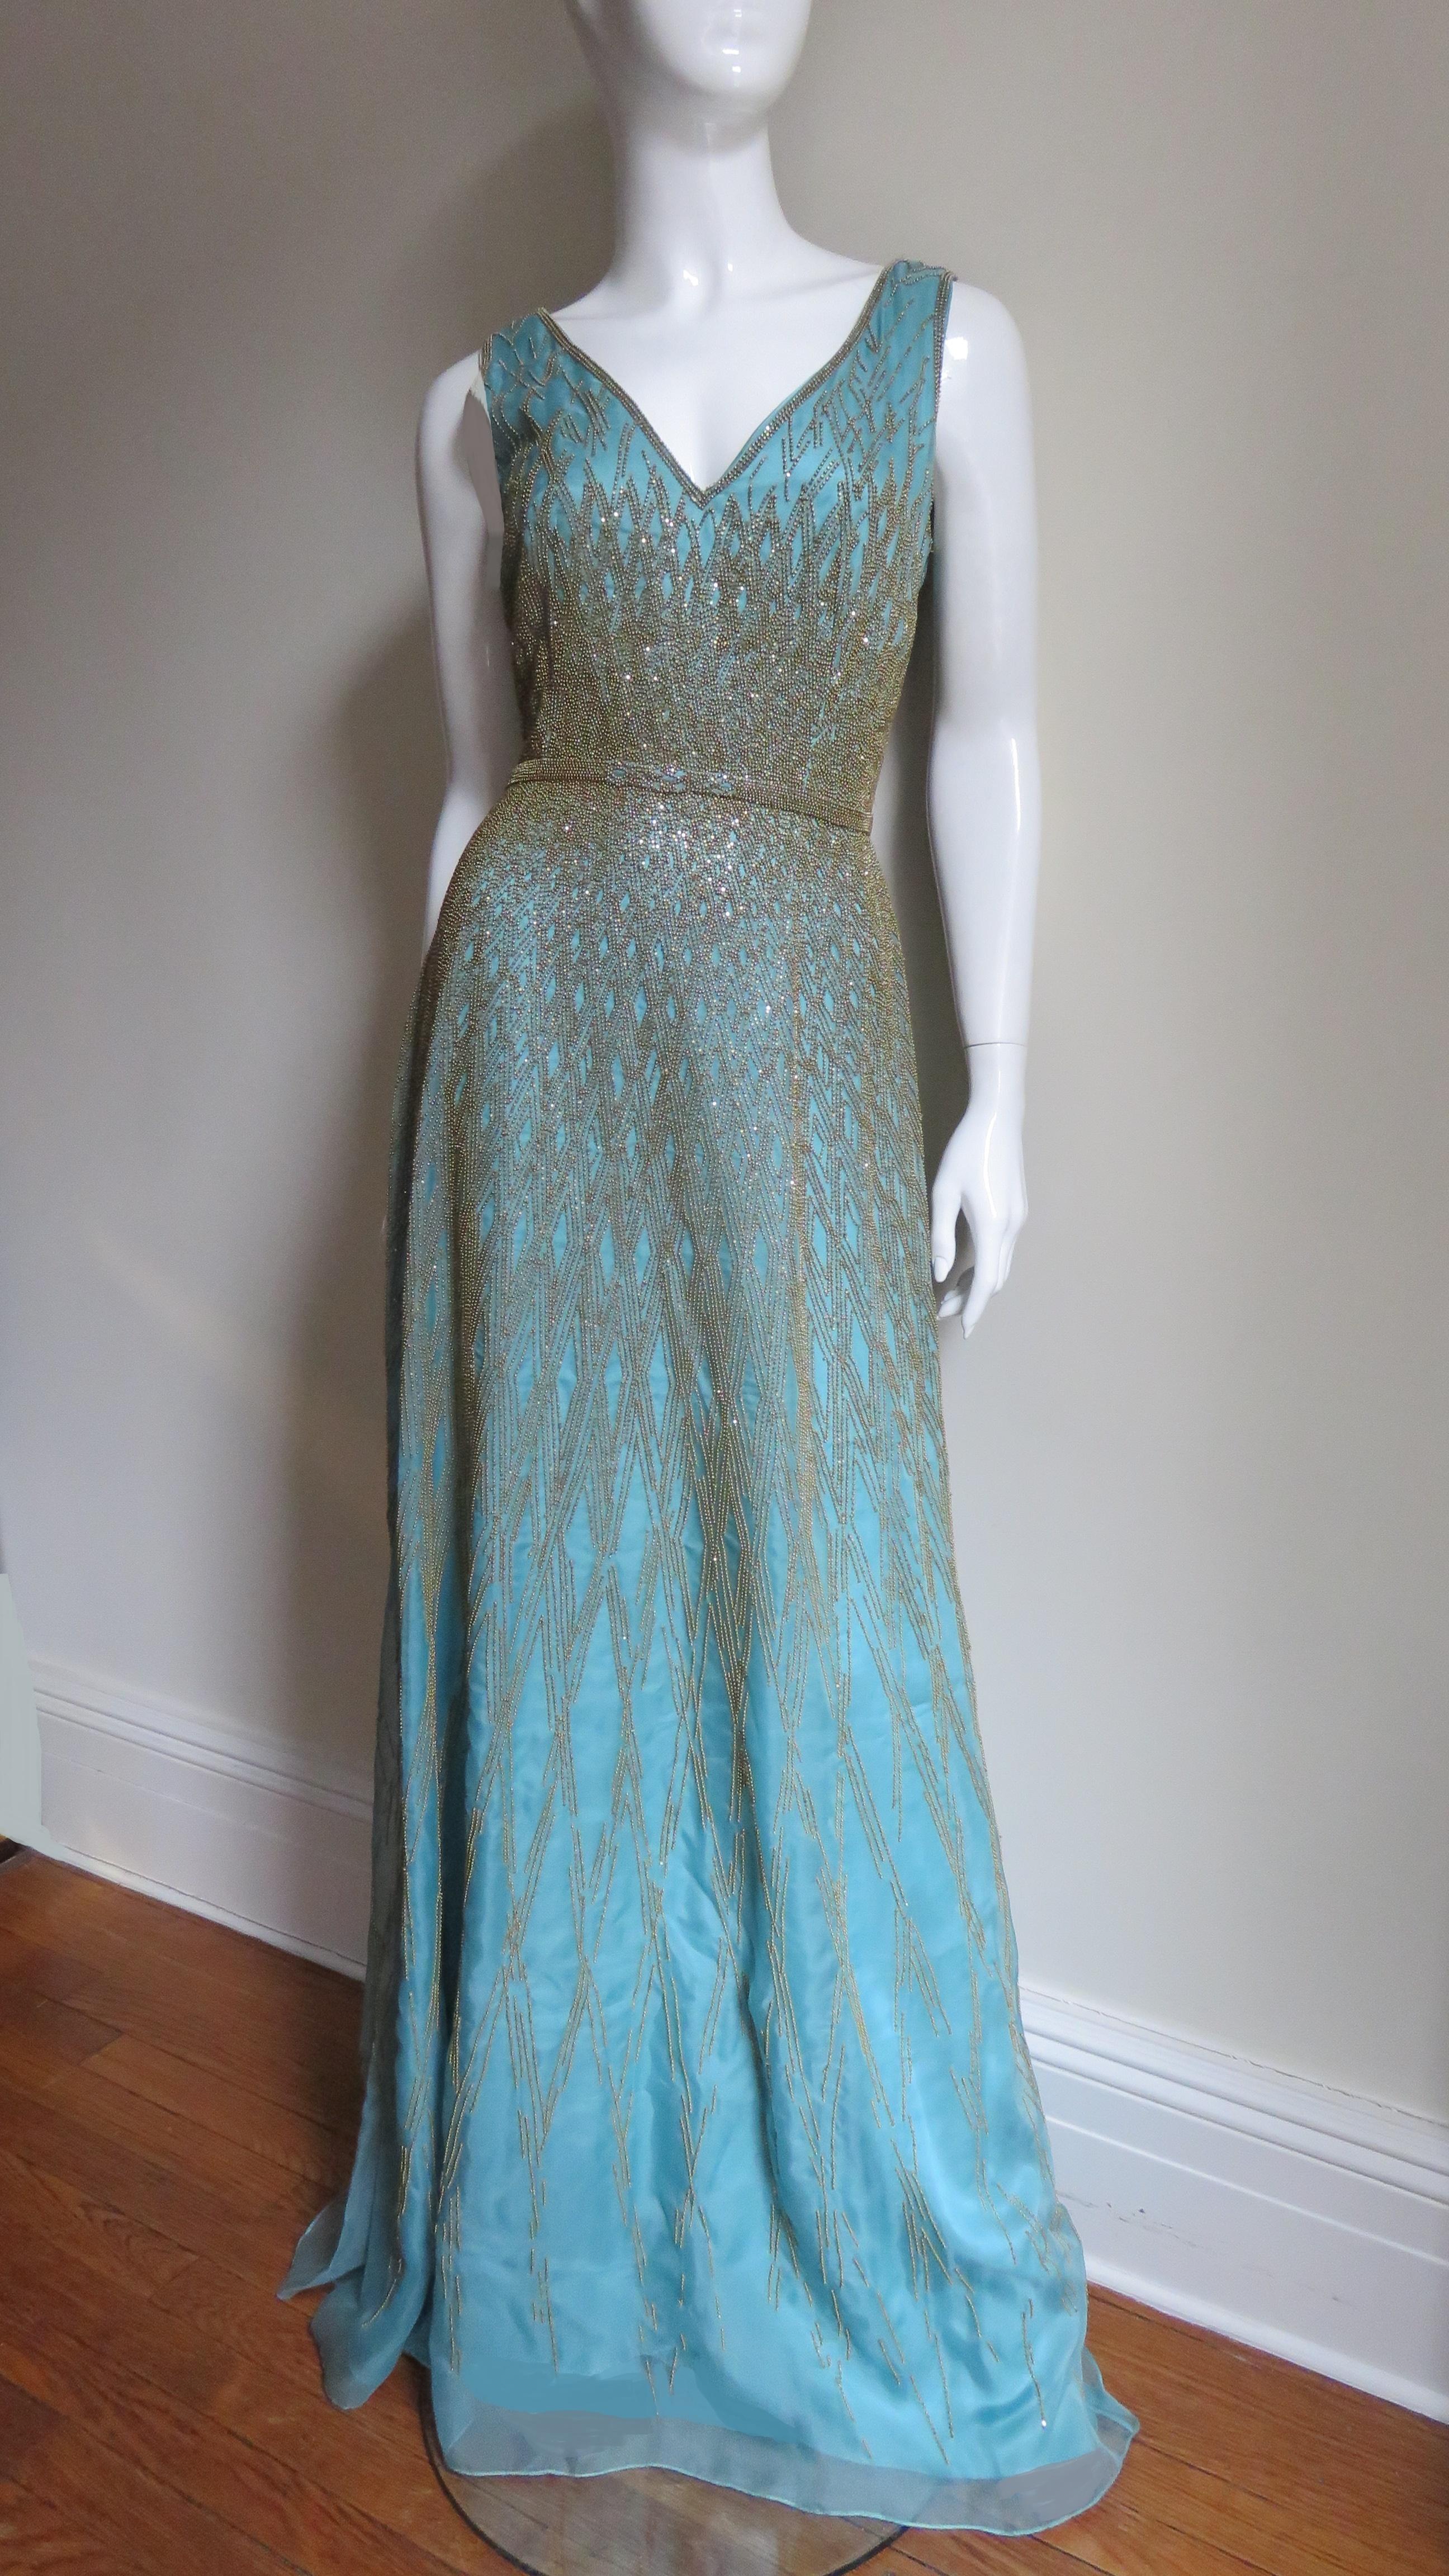 So gorgeous.. an aqua silk gown covered in an intricate design of gold glass beading by Carolina Herrera.  It has a V neckline, fitted waist and full skirt.  All are covered with a detailed pattern of gold beading on sheer aqua silk organza